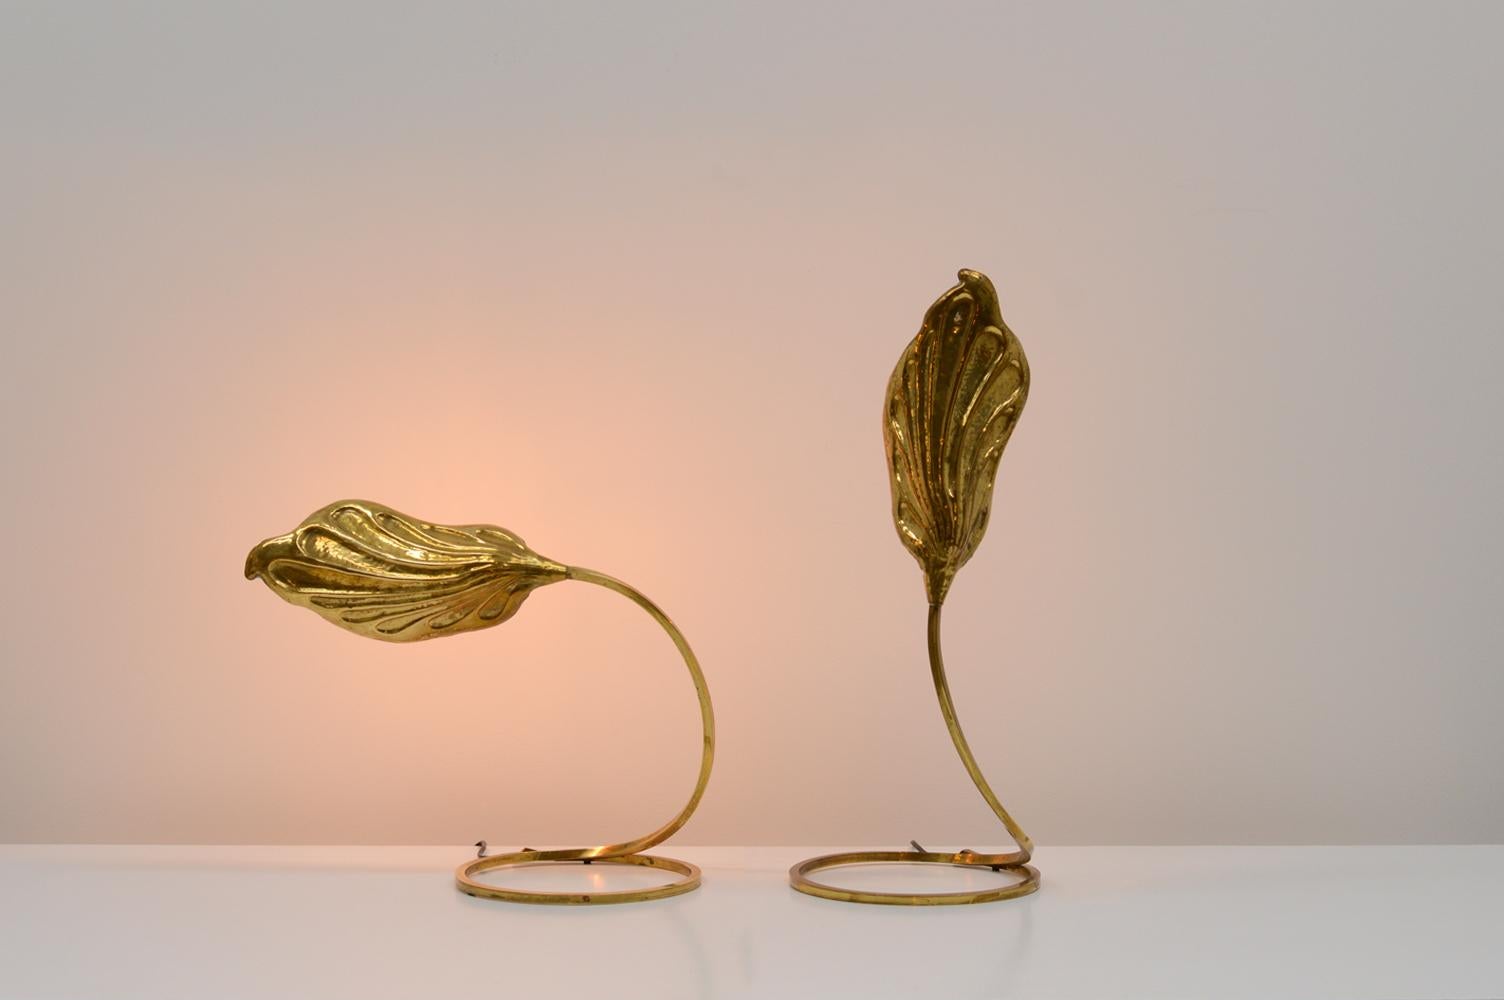 Set of 2 brass leaf tables lamps by Carlo Giorgi & Tommaso Barbi for Bottega Gadda, Italy 70s. 2 different versions of the table lamp. Both lamps are rewired. Original black bakelite E14 bulb holder. Nice patina and in good vintage condition.